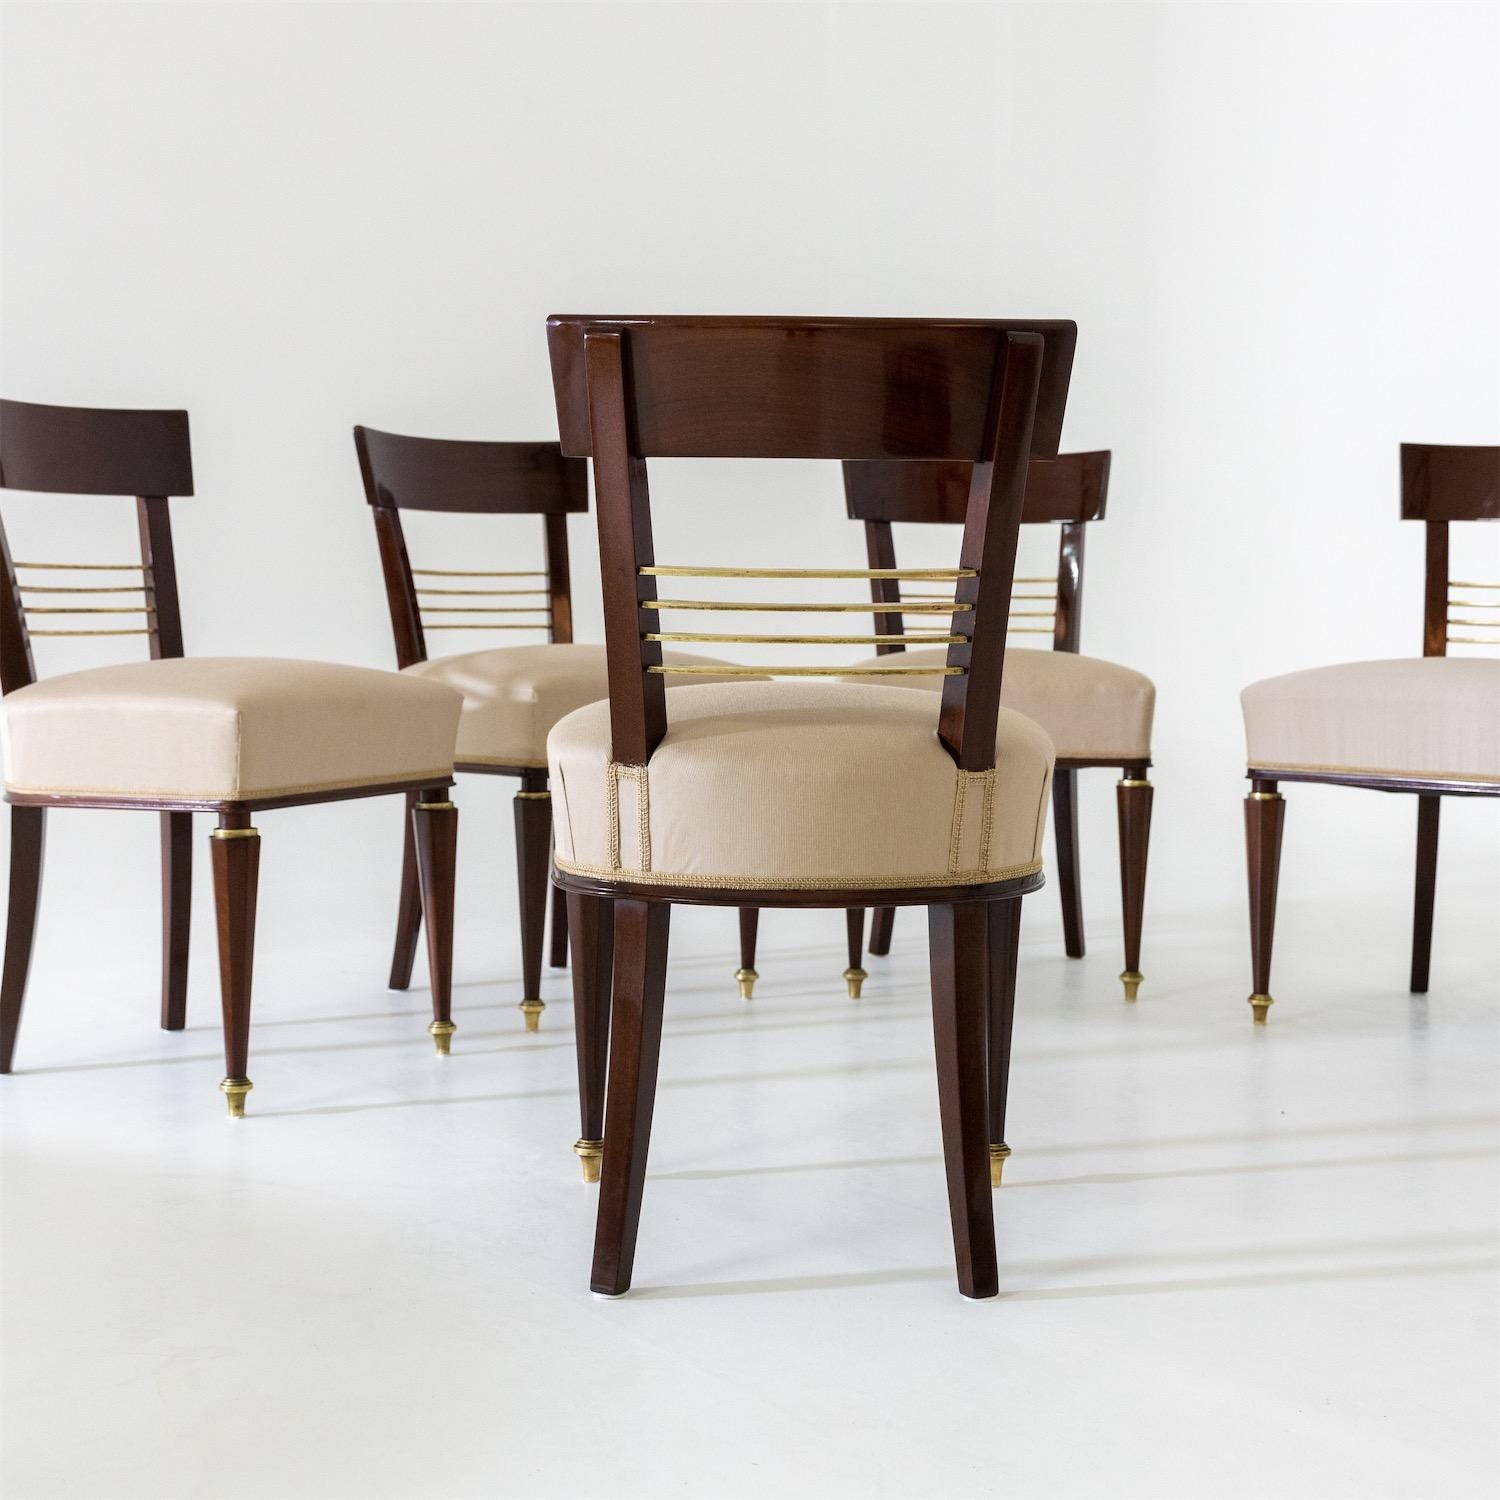 Set of Six Dining Room Chairs, Mid-19th Century 8